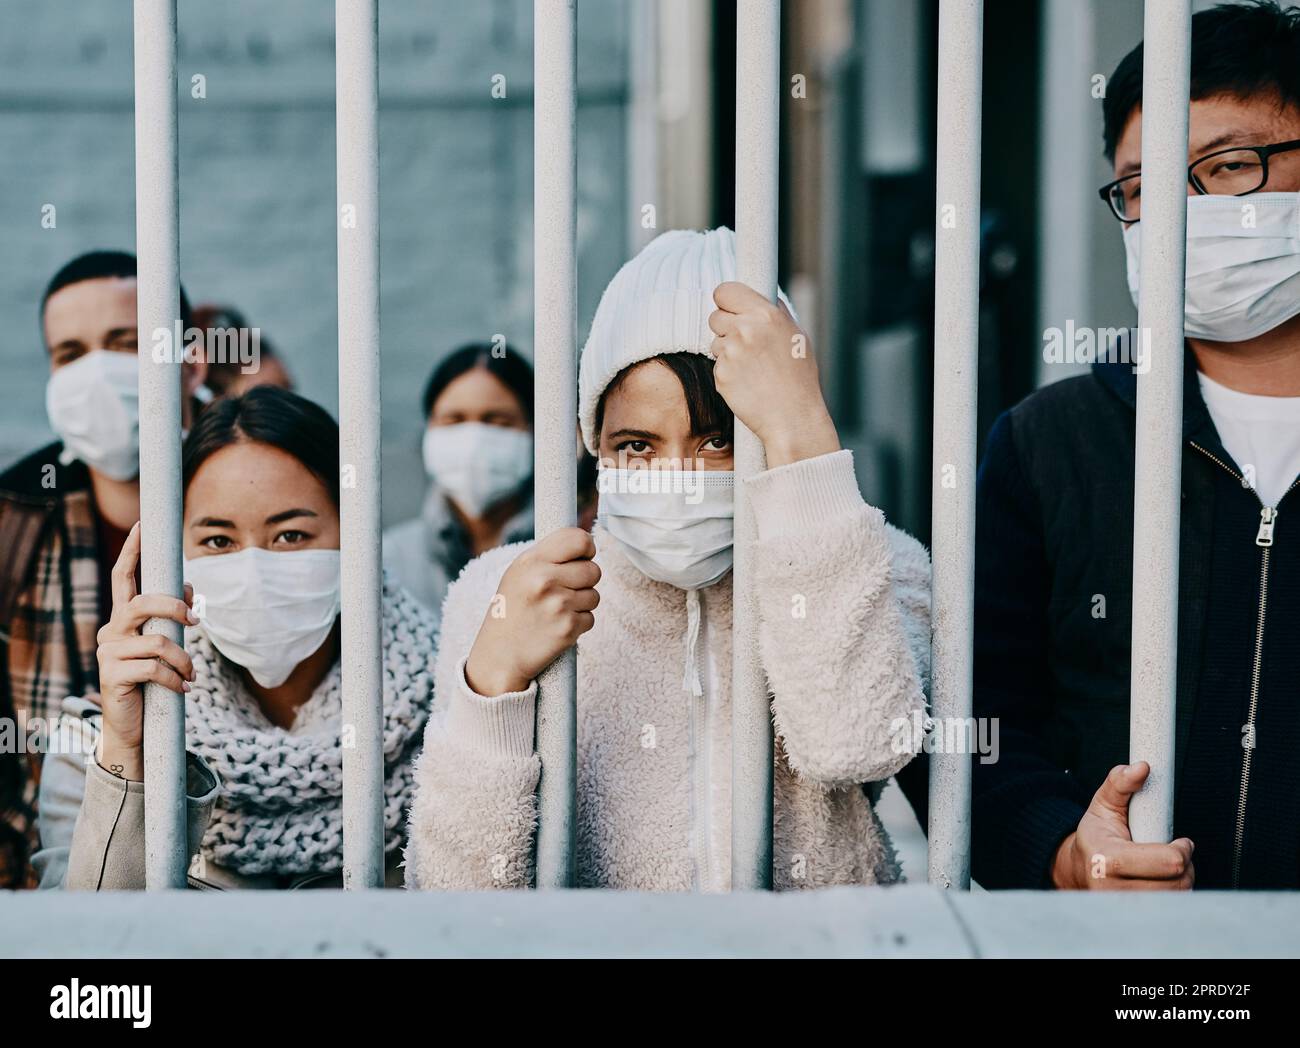 Foreign people in isolation wearing covid face mask at the border or in quarantine or airport looking unhappy, upset and angry. Poor refugees, immigrants and tourists stuck behind a gate in lockdown Stock Photo